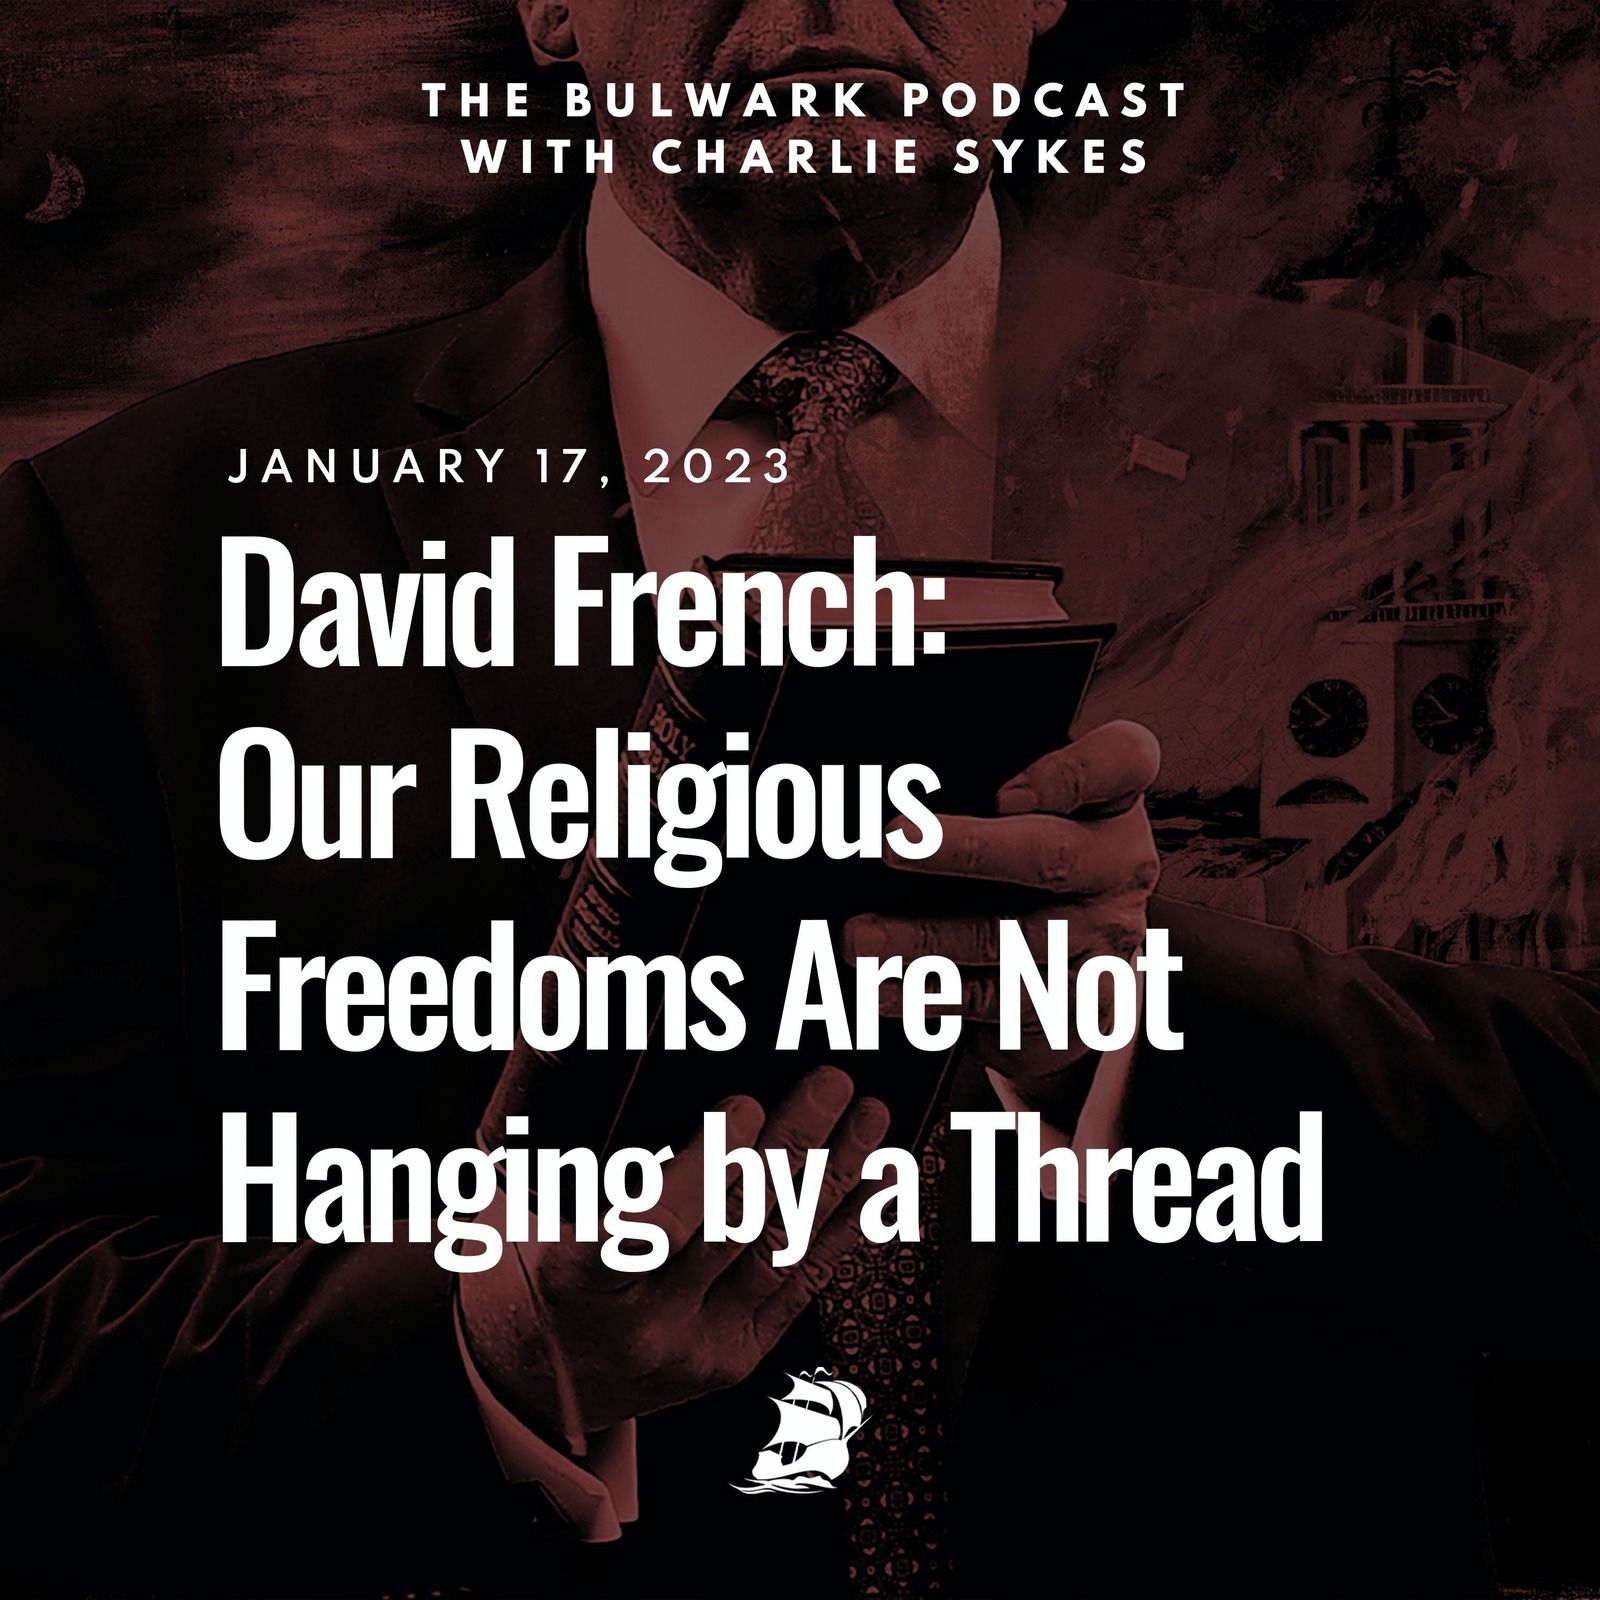 David French: Our Religious Freedoms Are Not Hanging by a Thread